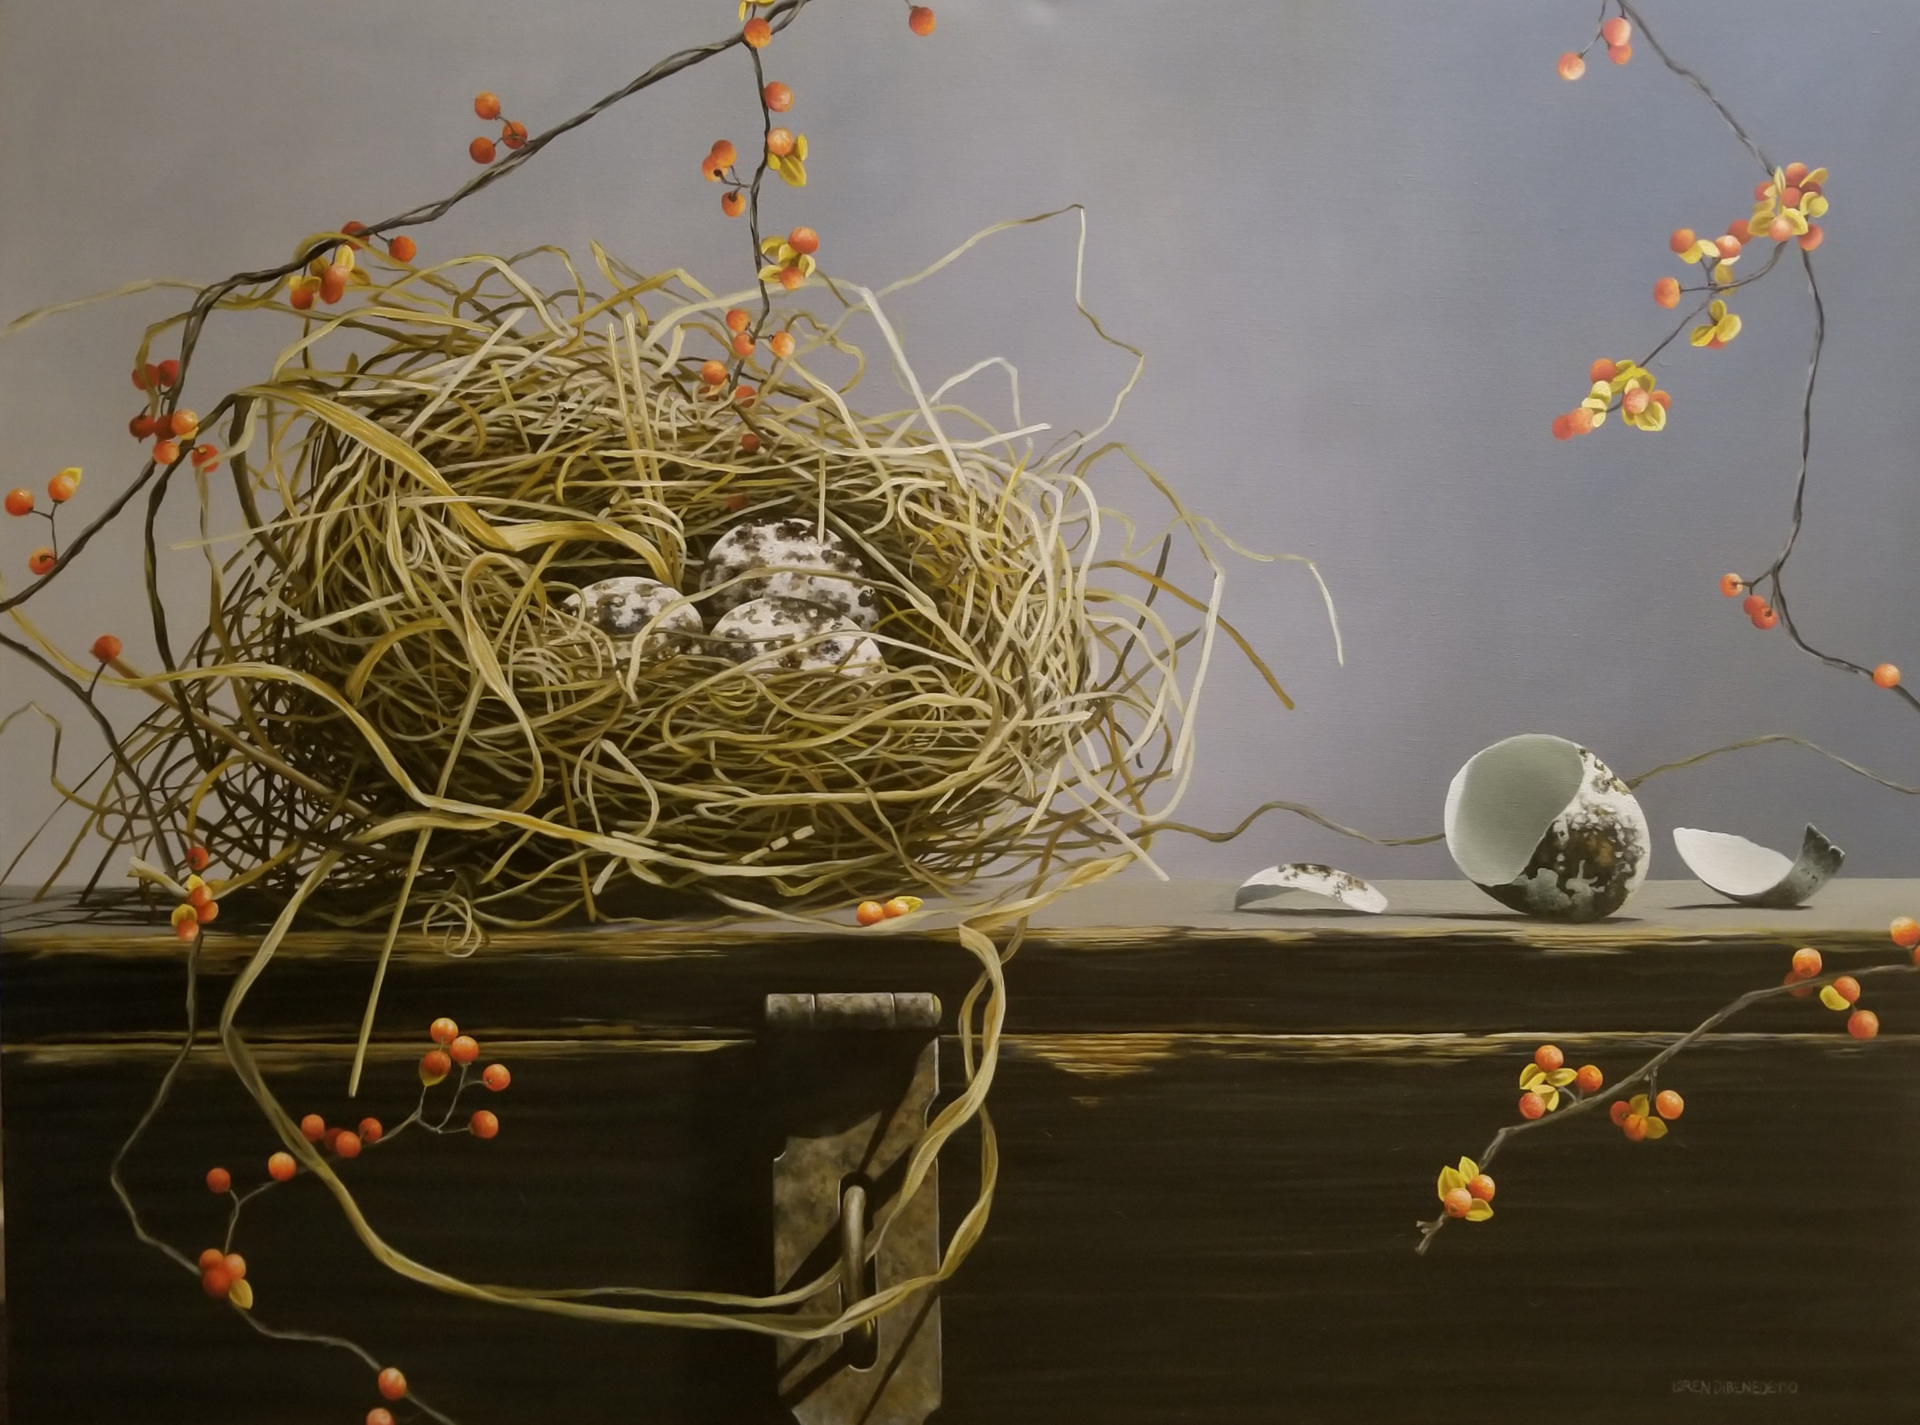 Nest Eggs and Bittersweet by Loren DiBenedetto, OPA